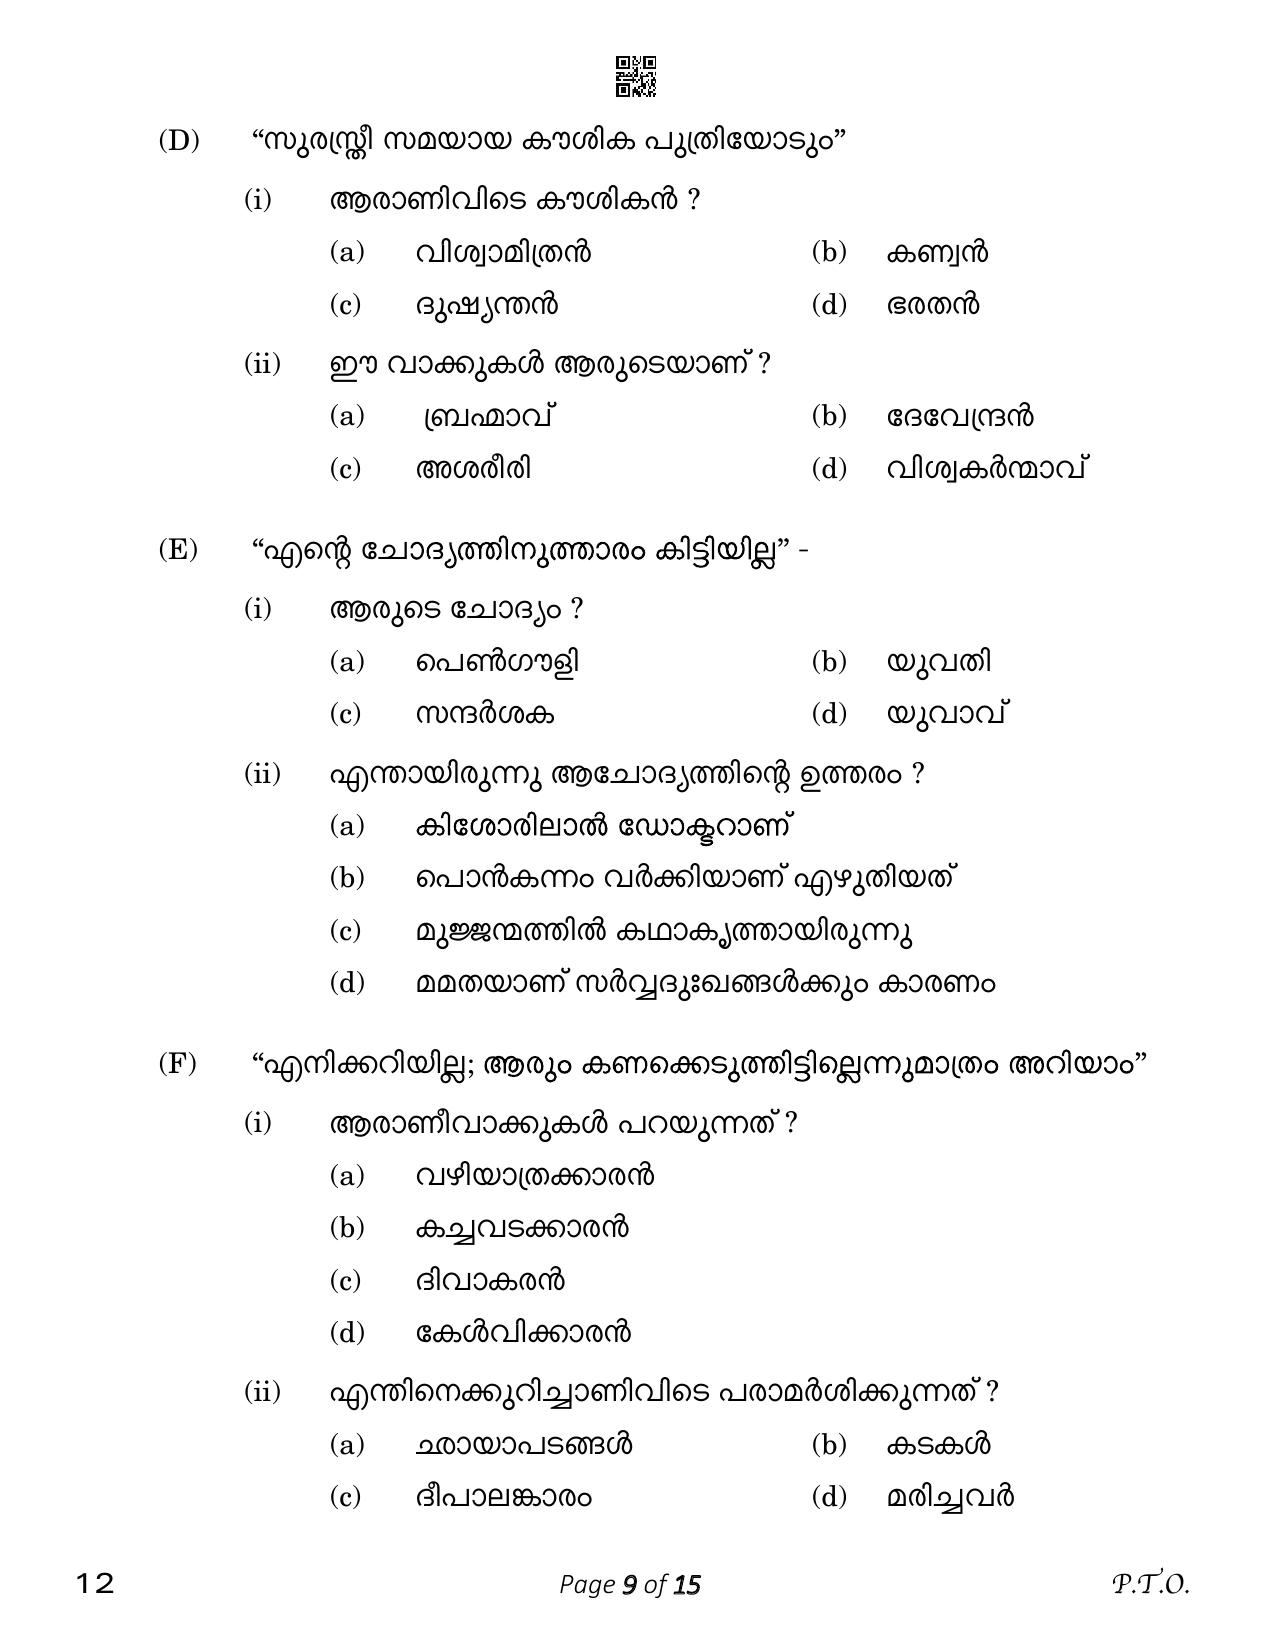 CBSE Class 12 Malayalam (Compartment) 2023 Question Paper - Page 9